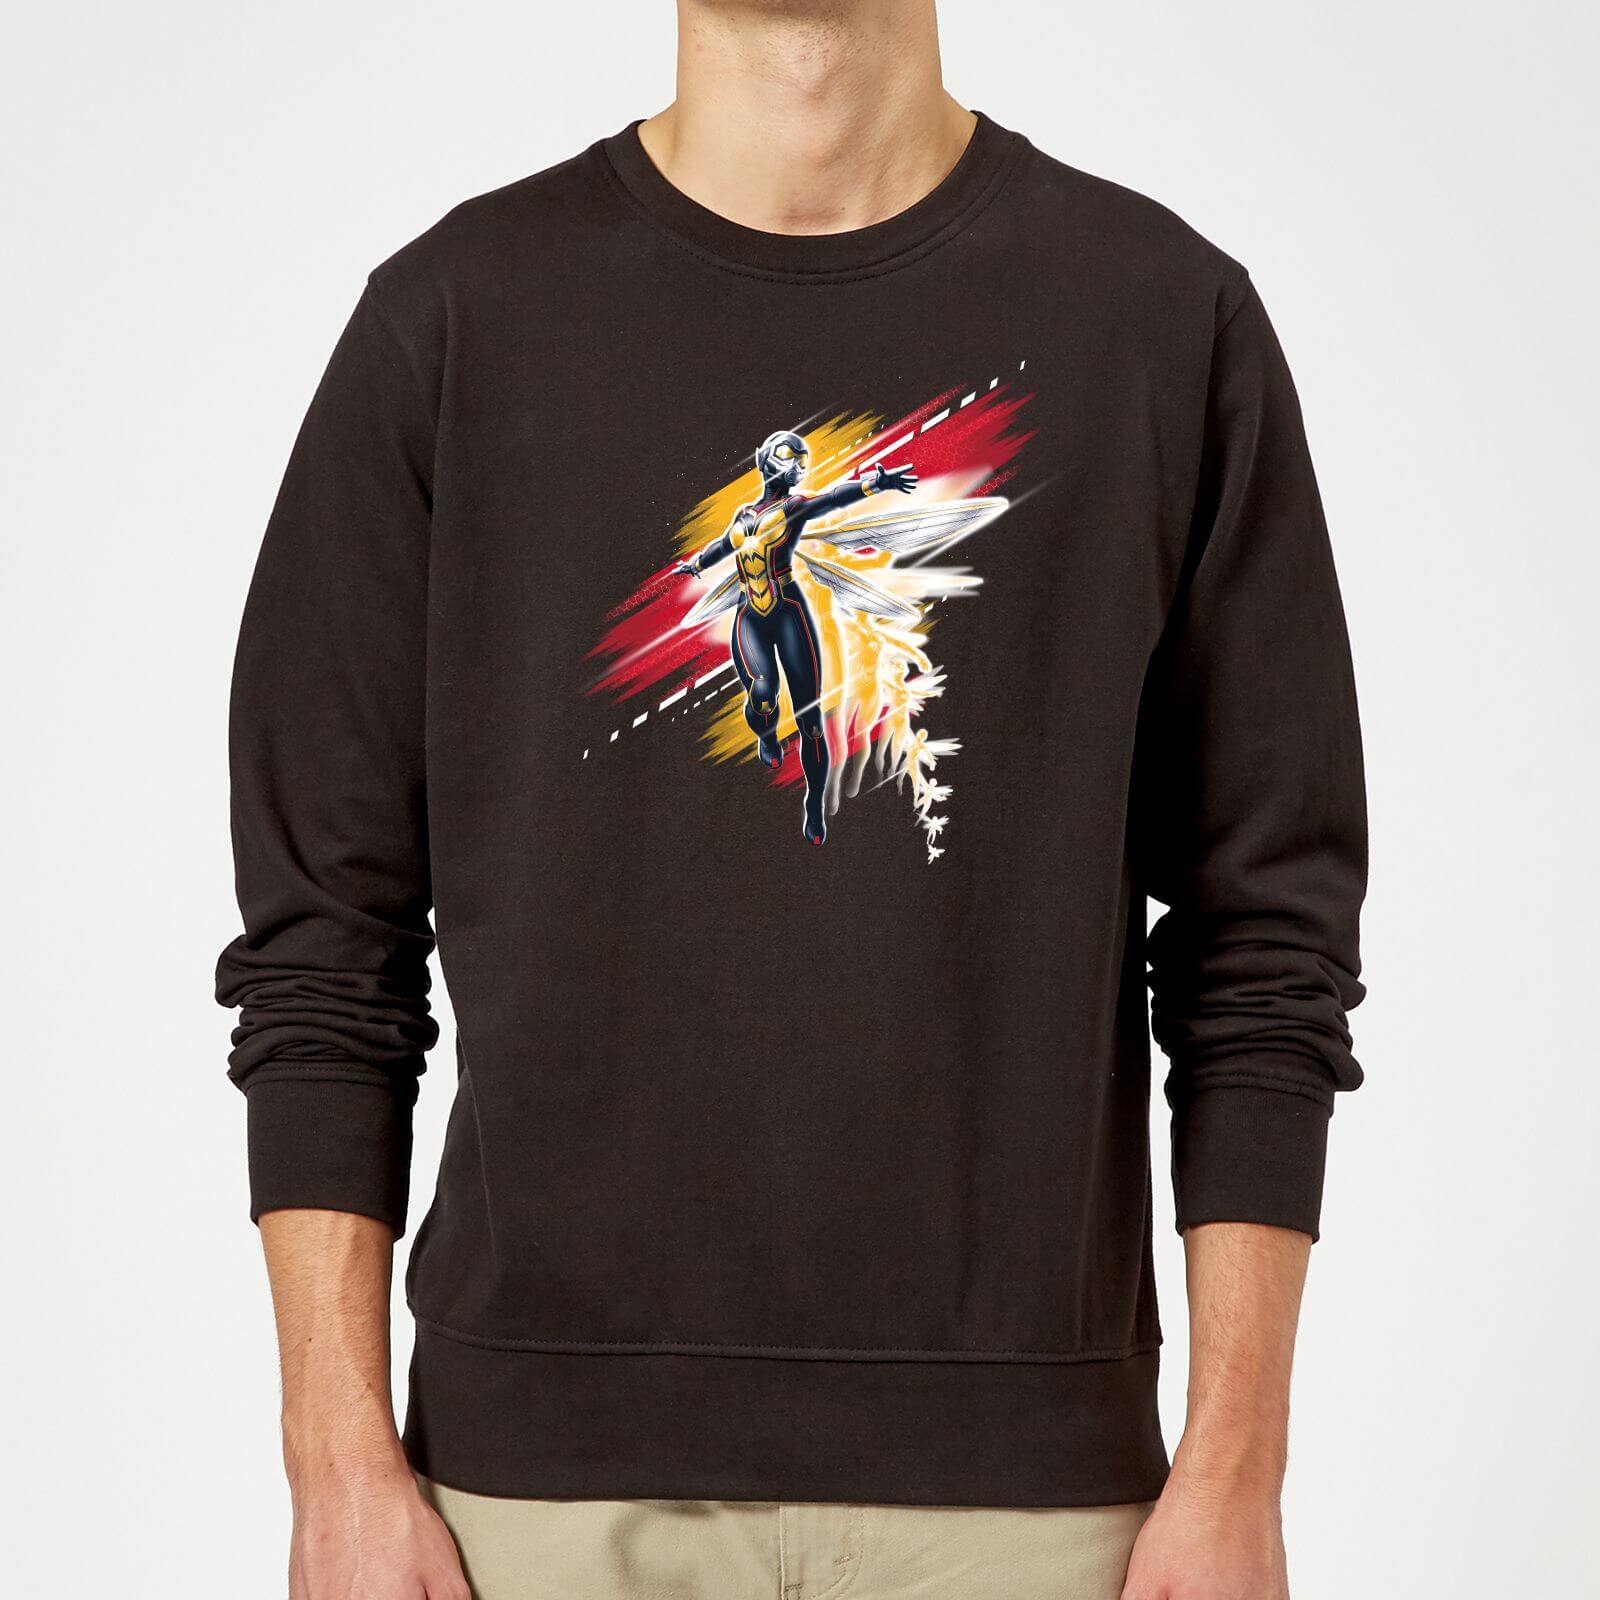 Ant-Man And The Wasp Brushed Sweatshirt - Black - Xl